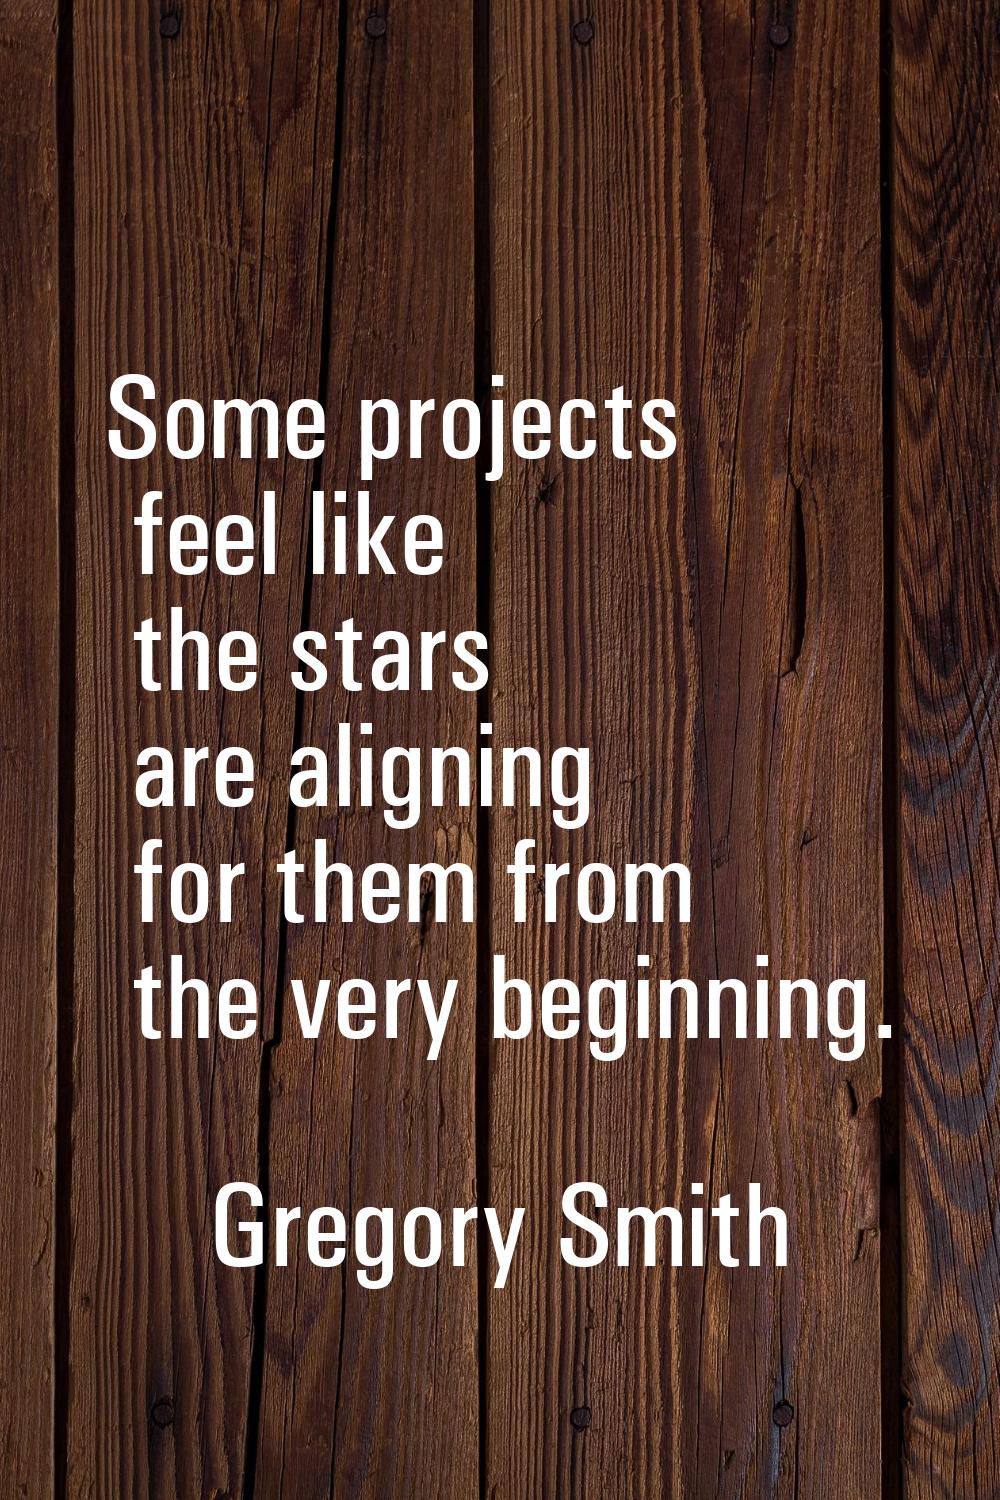 Some projects feel like the stars are aligning for them from the very beginning.